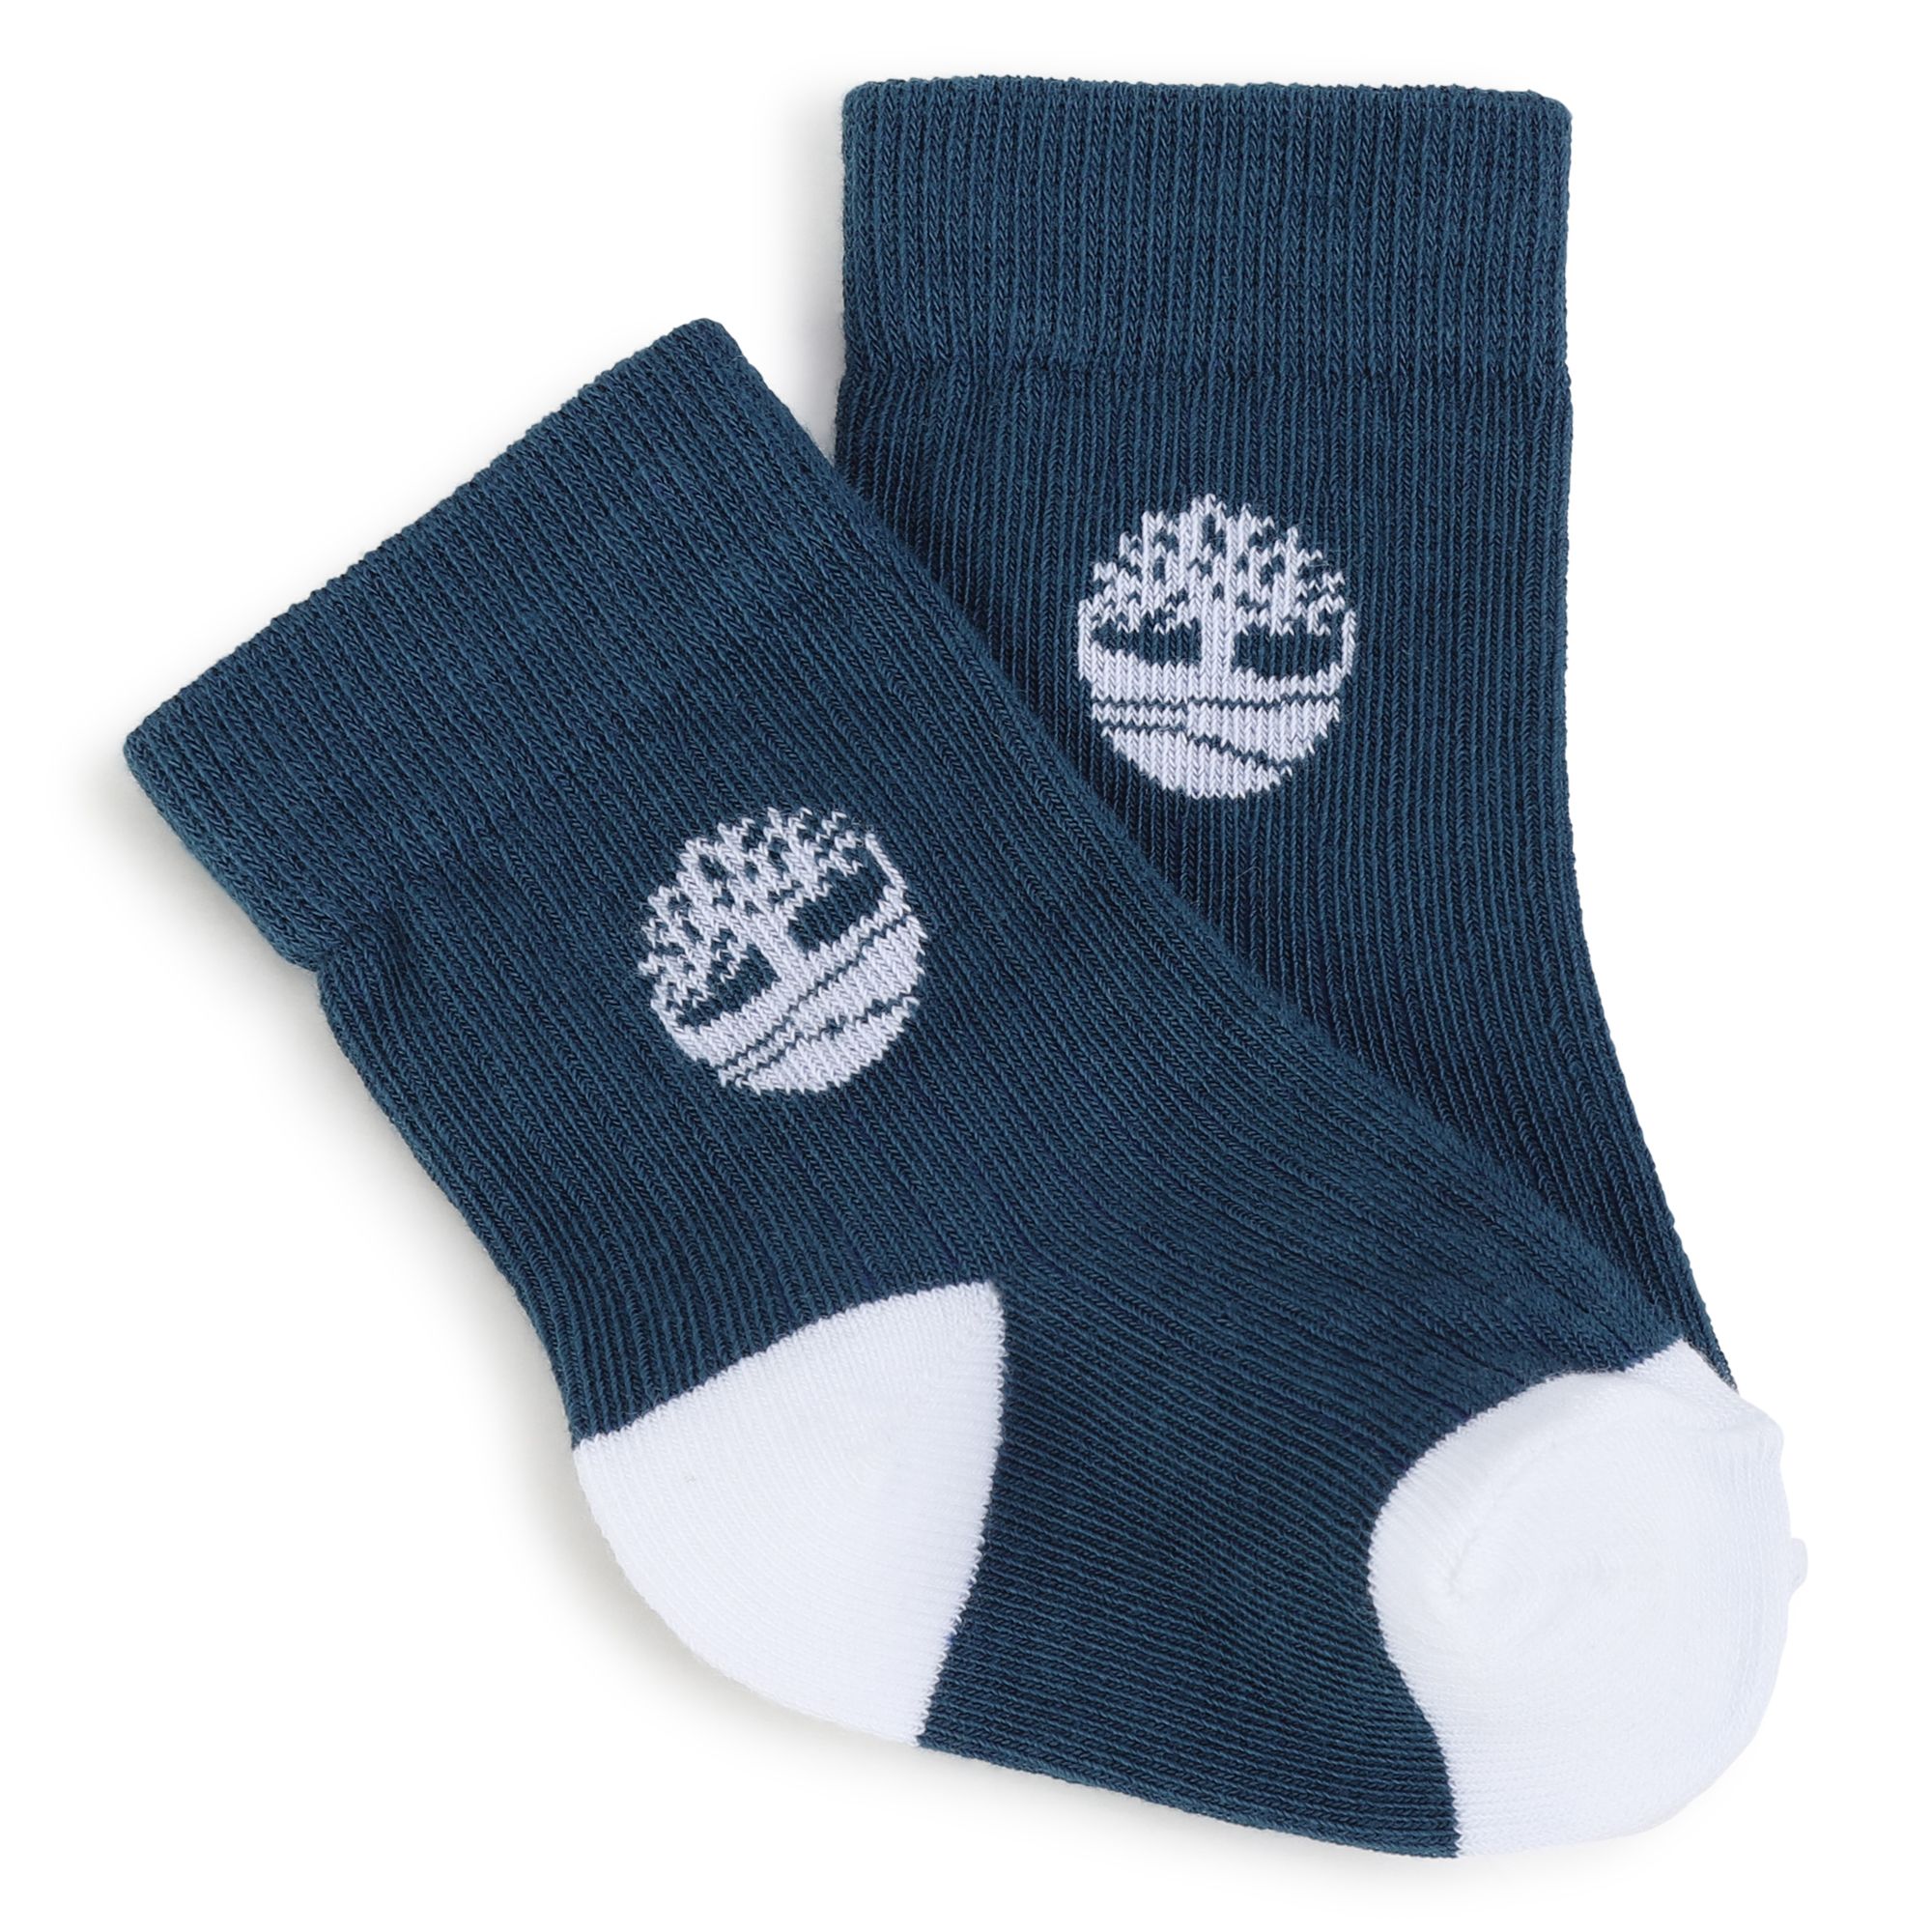 3-pack of socks TIMBERLAND for BOY